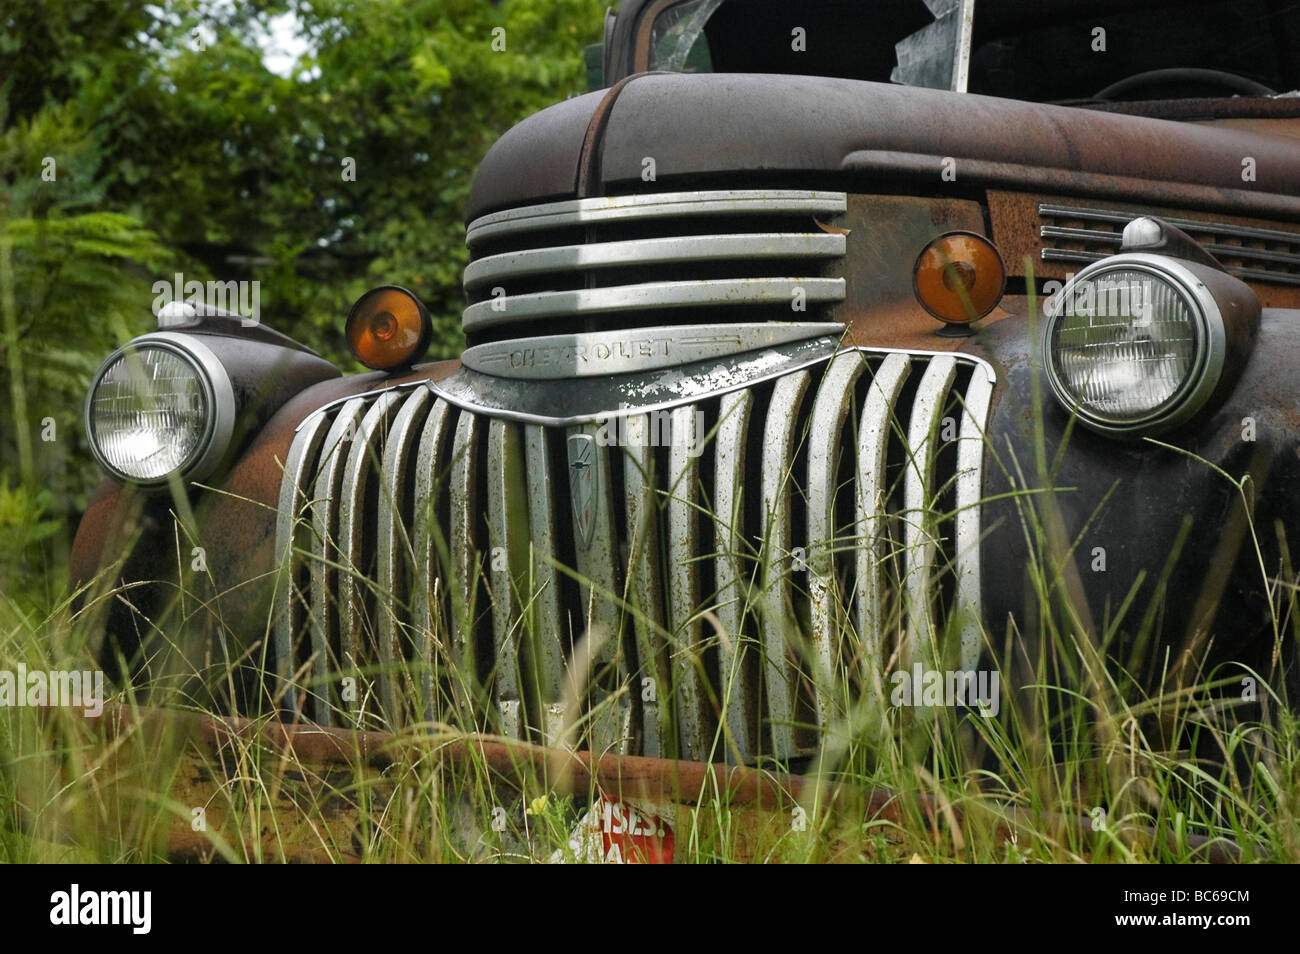 Old Chevrolet work truck abandoned in rural North Florida. Stock Photo